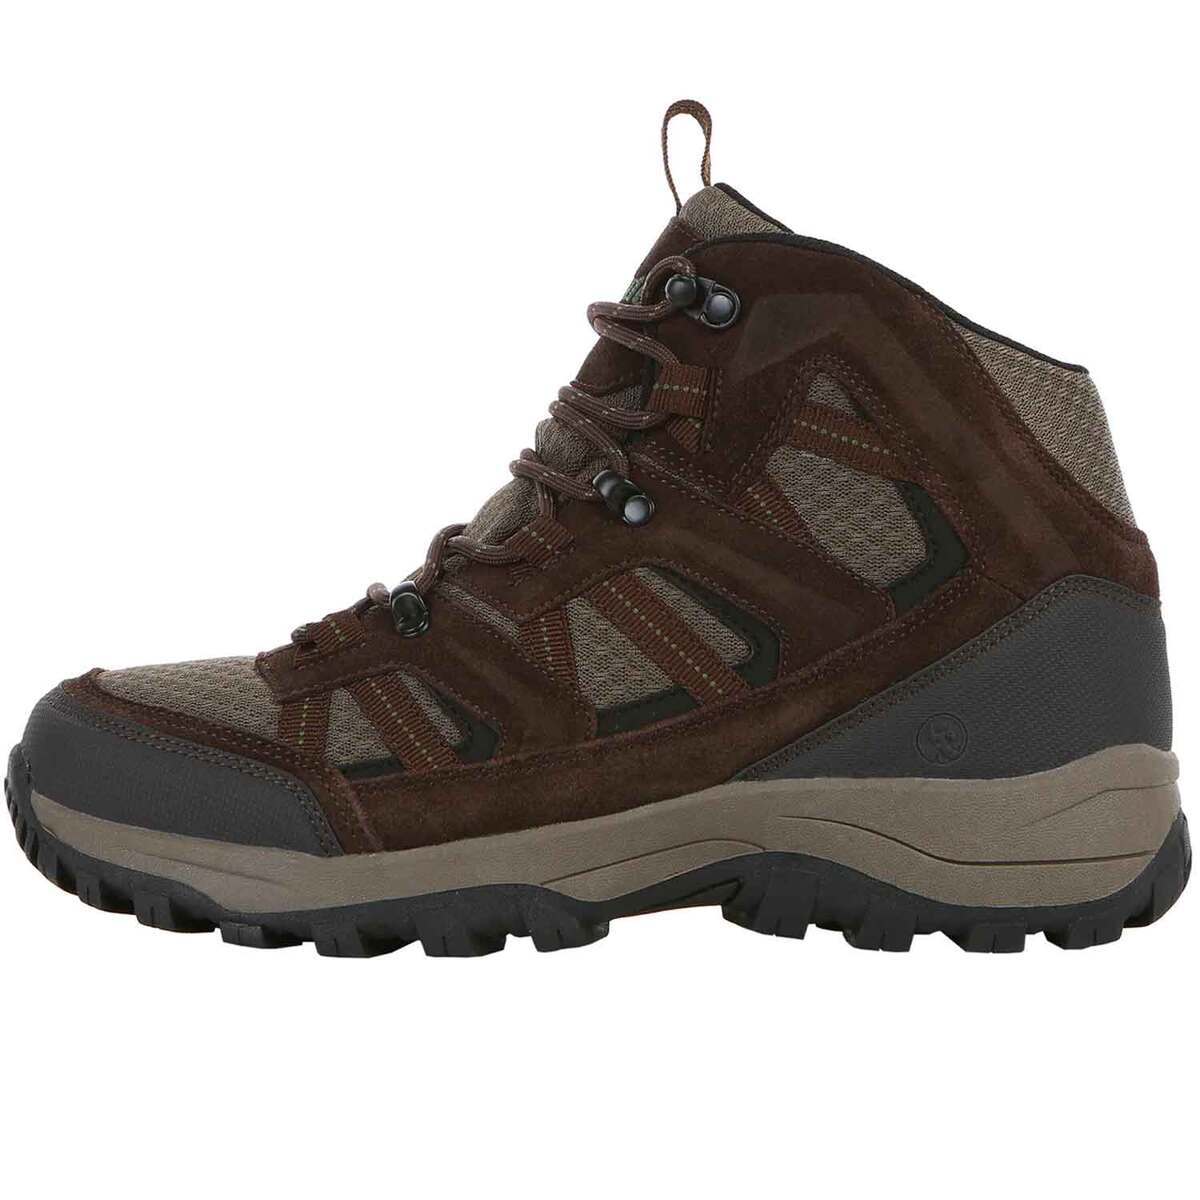 Northside Men's Arlow Canyon Mid Hiking Boots | Sportsman's Warehouse